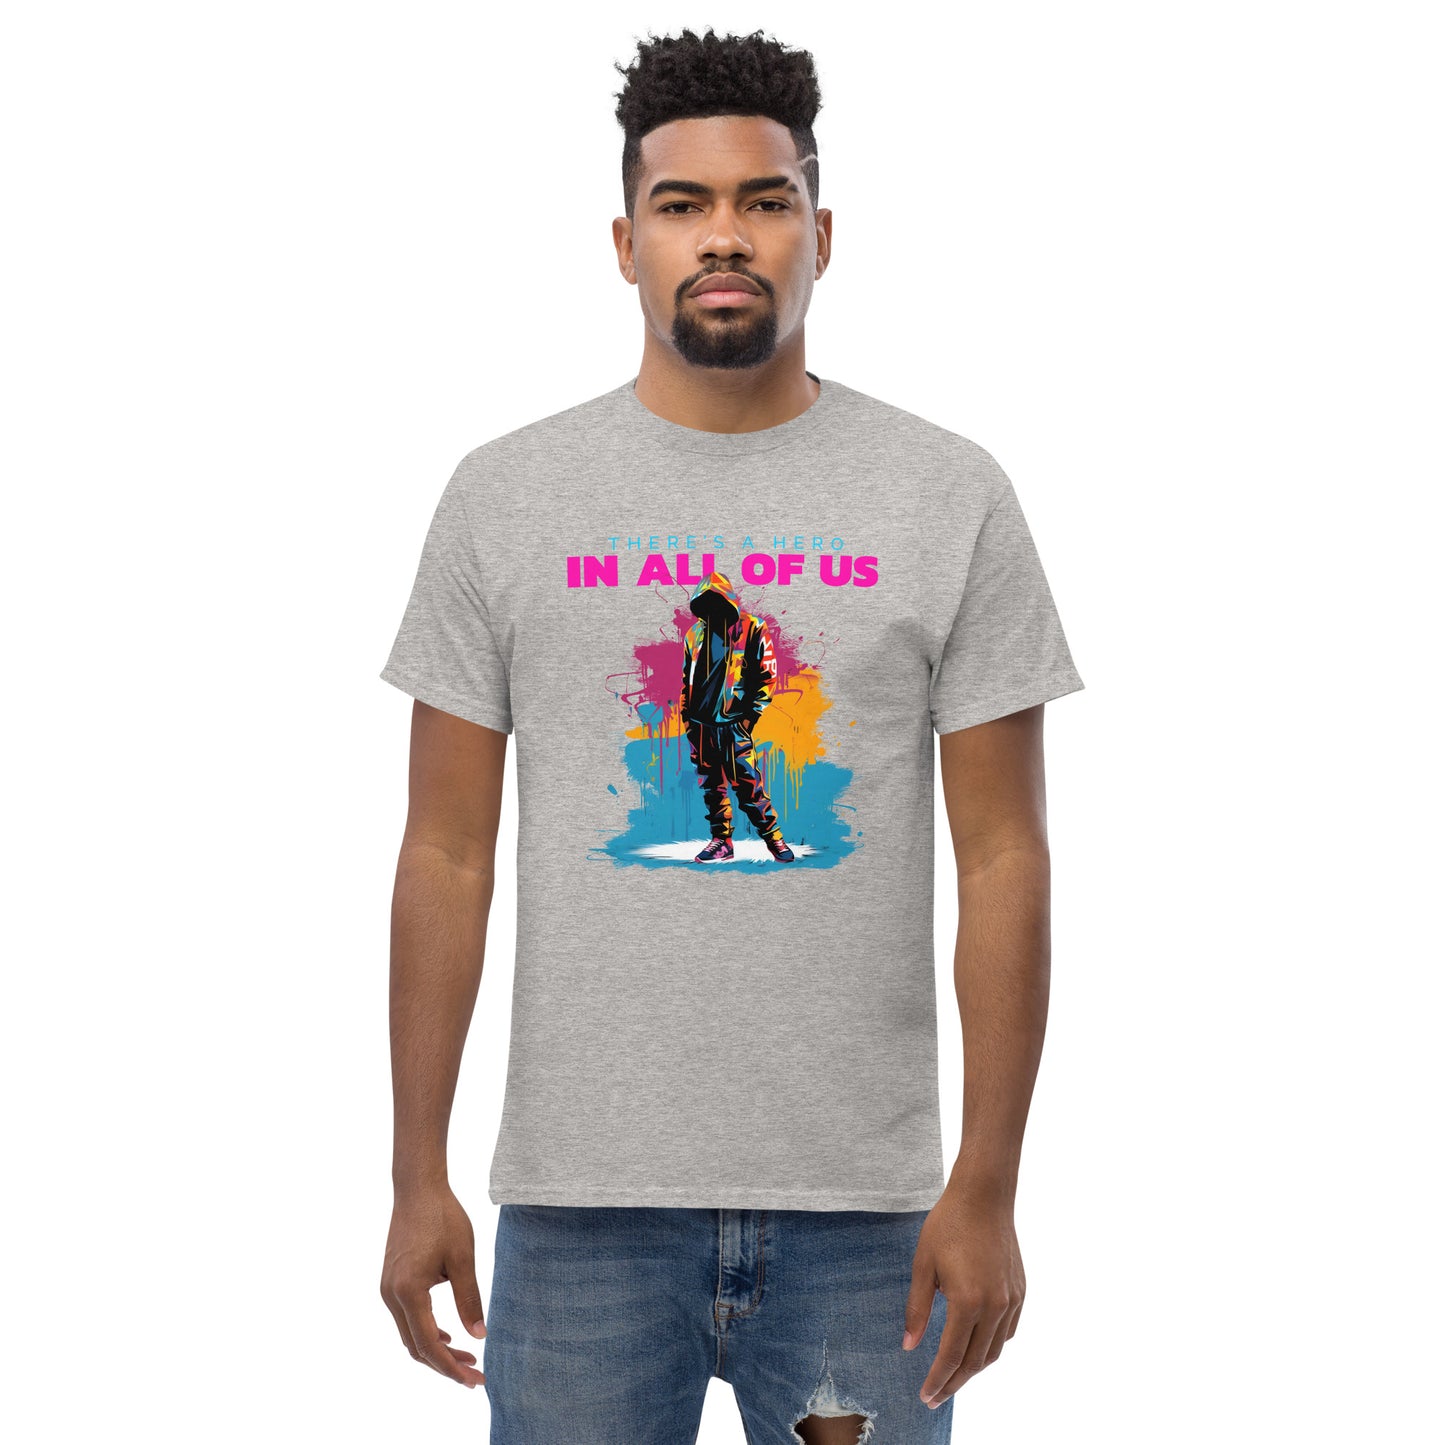 "There's a Hero in all of us" Men's classic tee